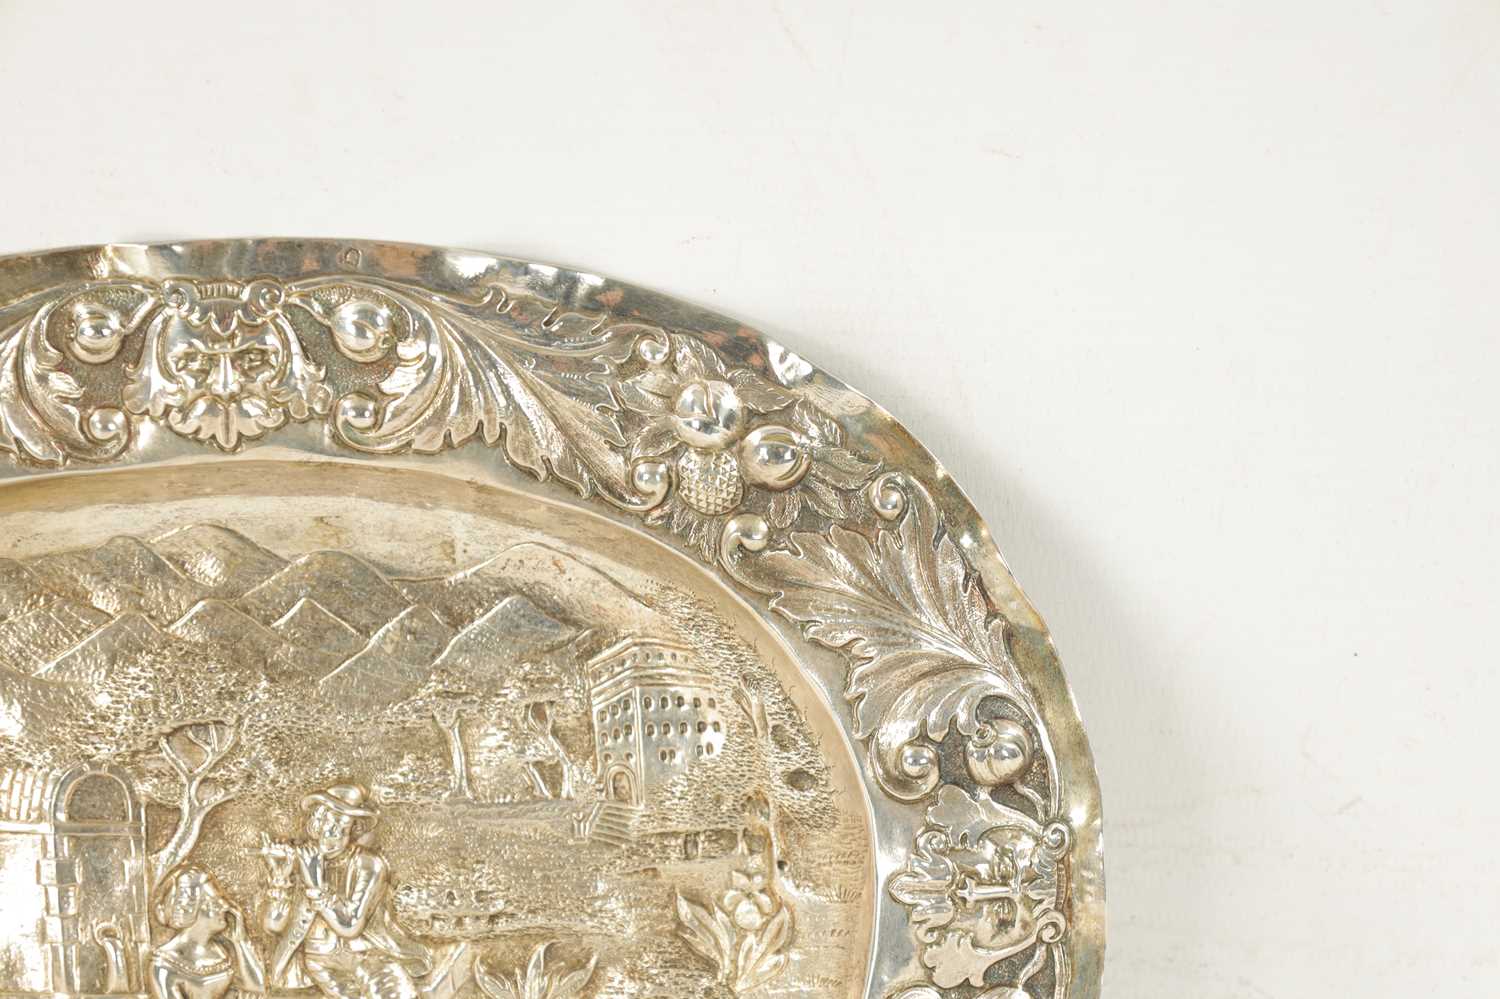 AN 18TH CENTURY GERMAN REPOUSSE SILVER AND SILVER GILT OVAL CHARGER - Image 3 of 10